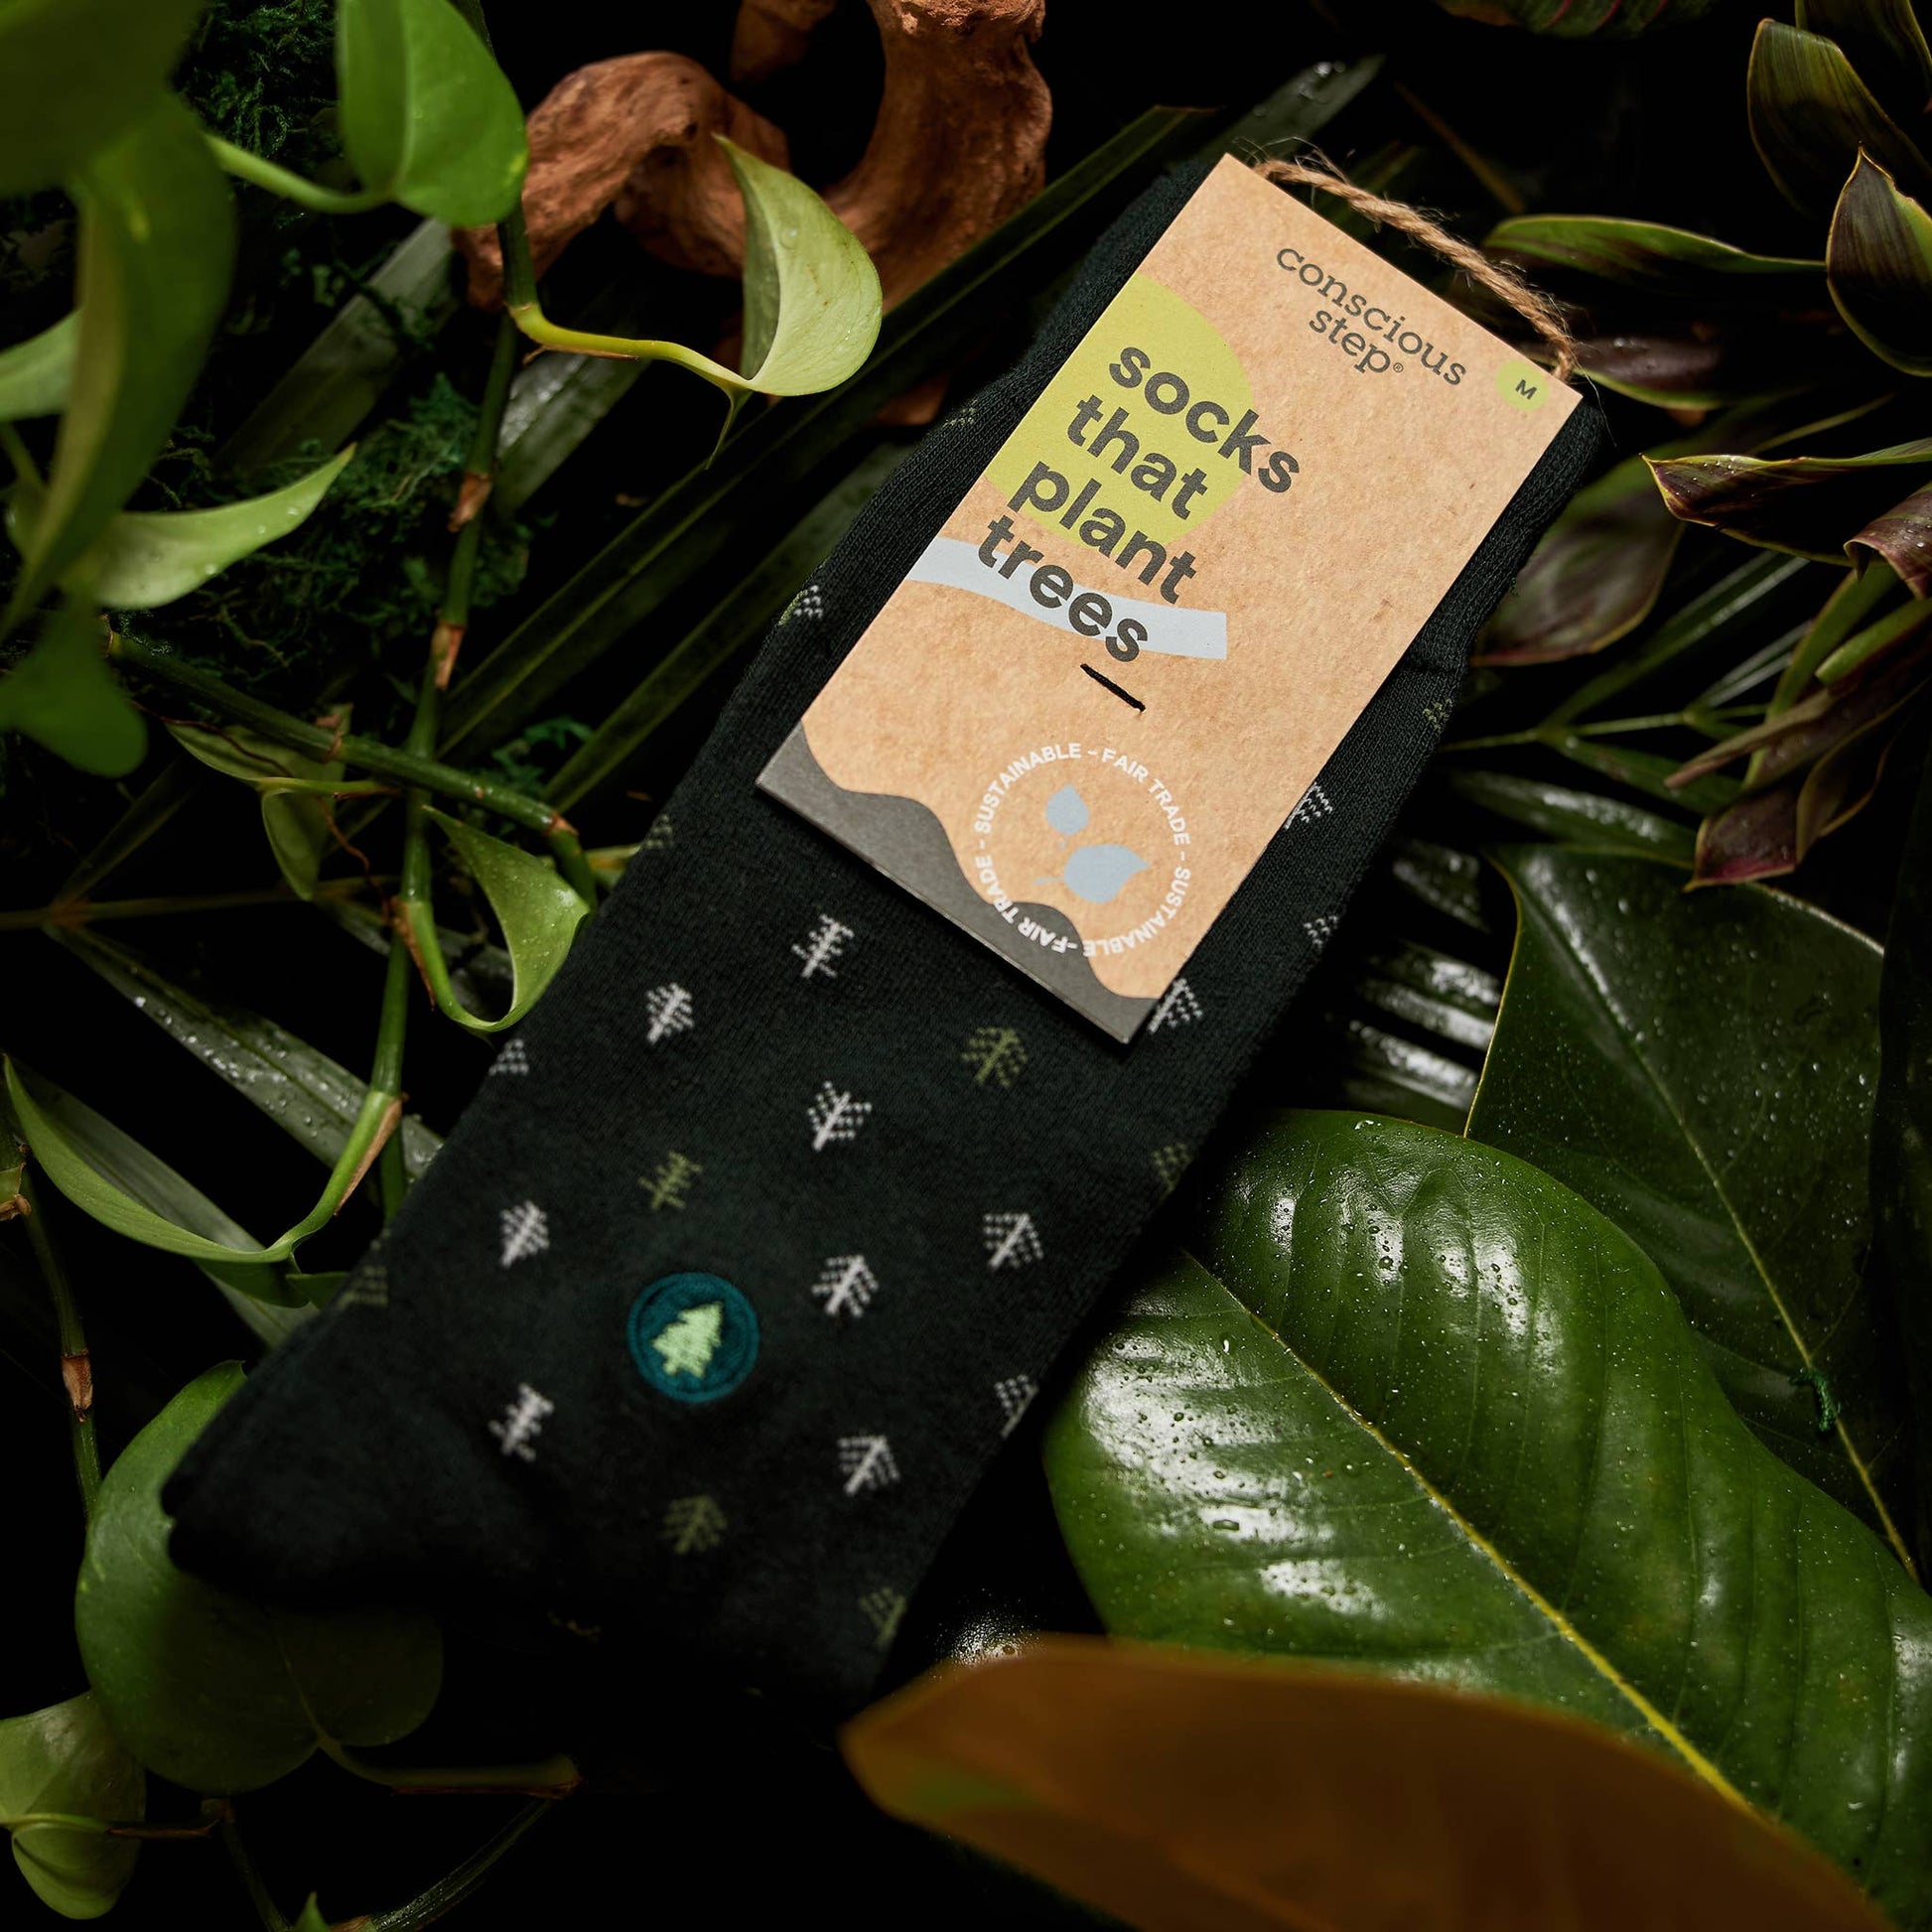 Conscious Step - Socks that Plant Trees (Tiny Trees)  Conscious Step   -better made easy-eco-friendly-sustainable-gifting